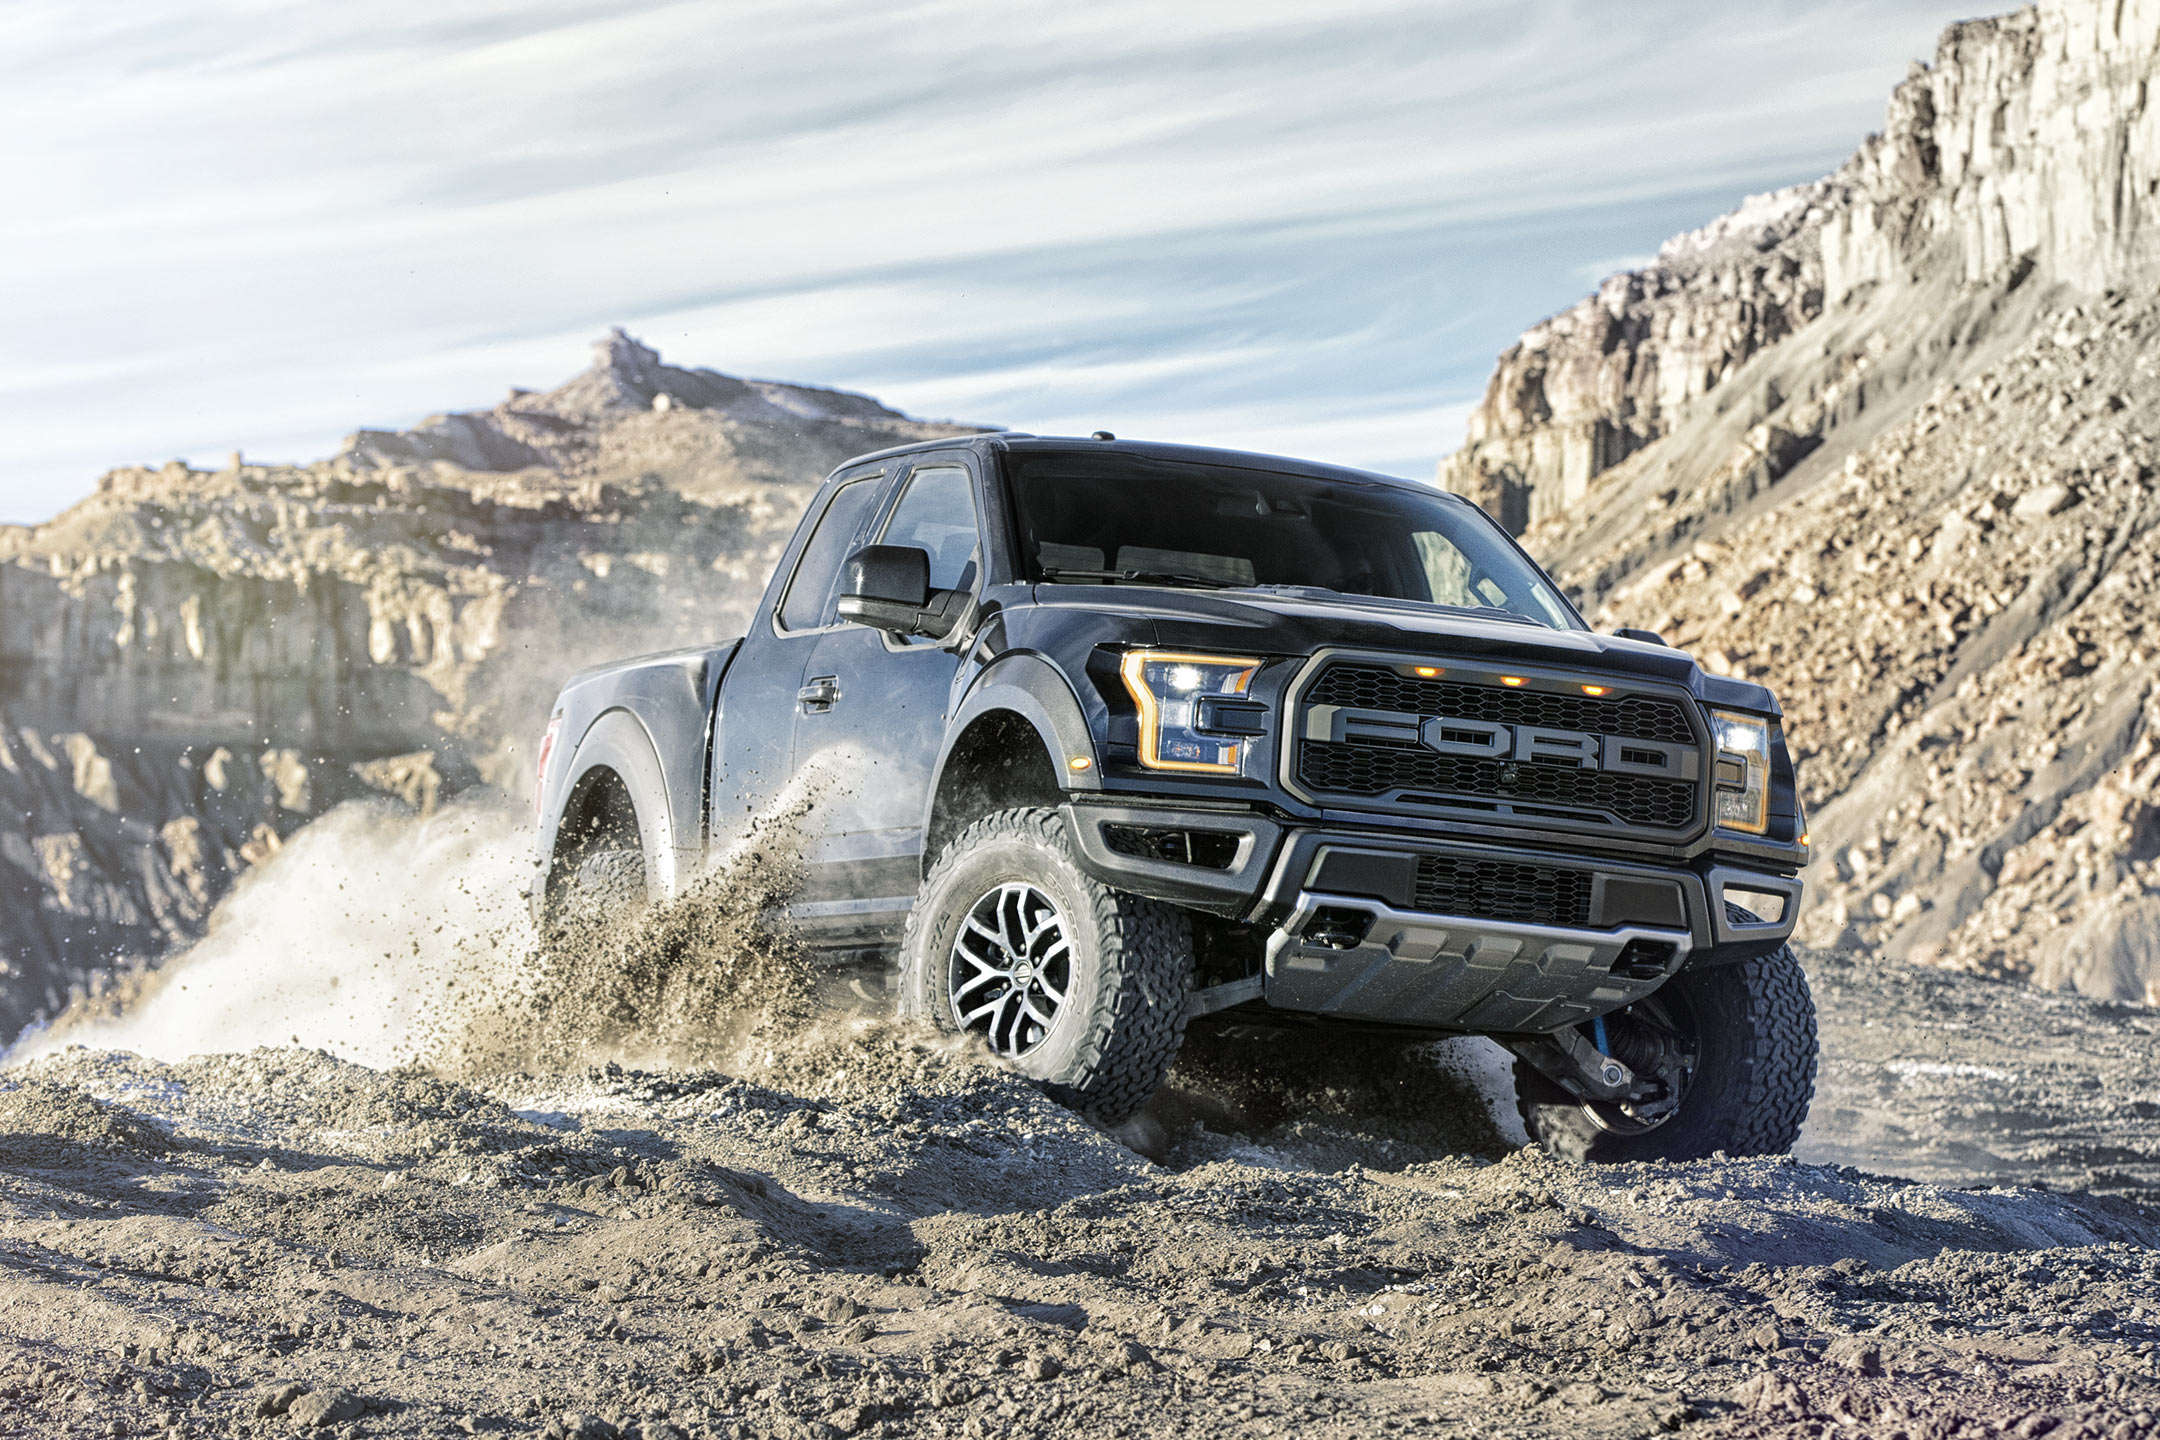 2017 Ford F-150 Black driving through mud and dirt